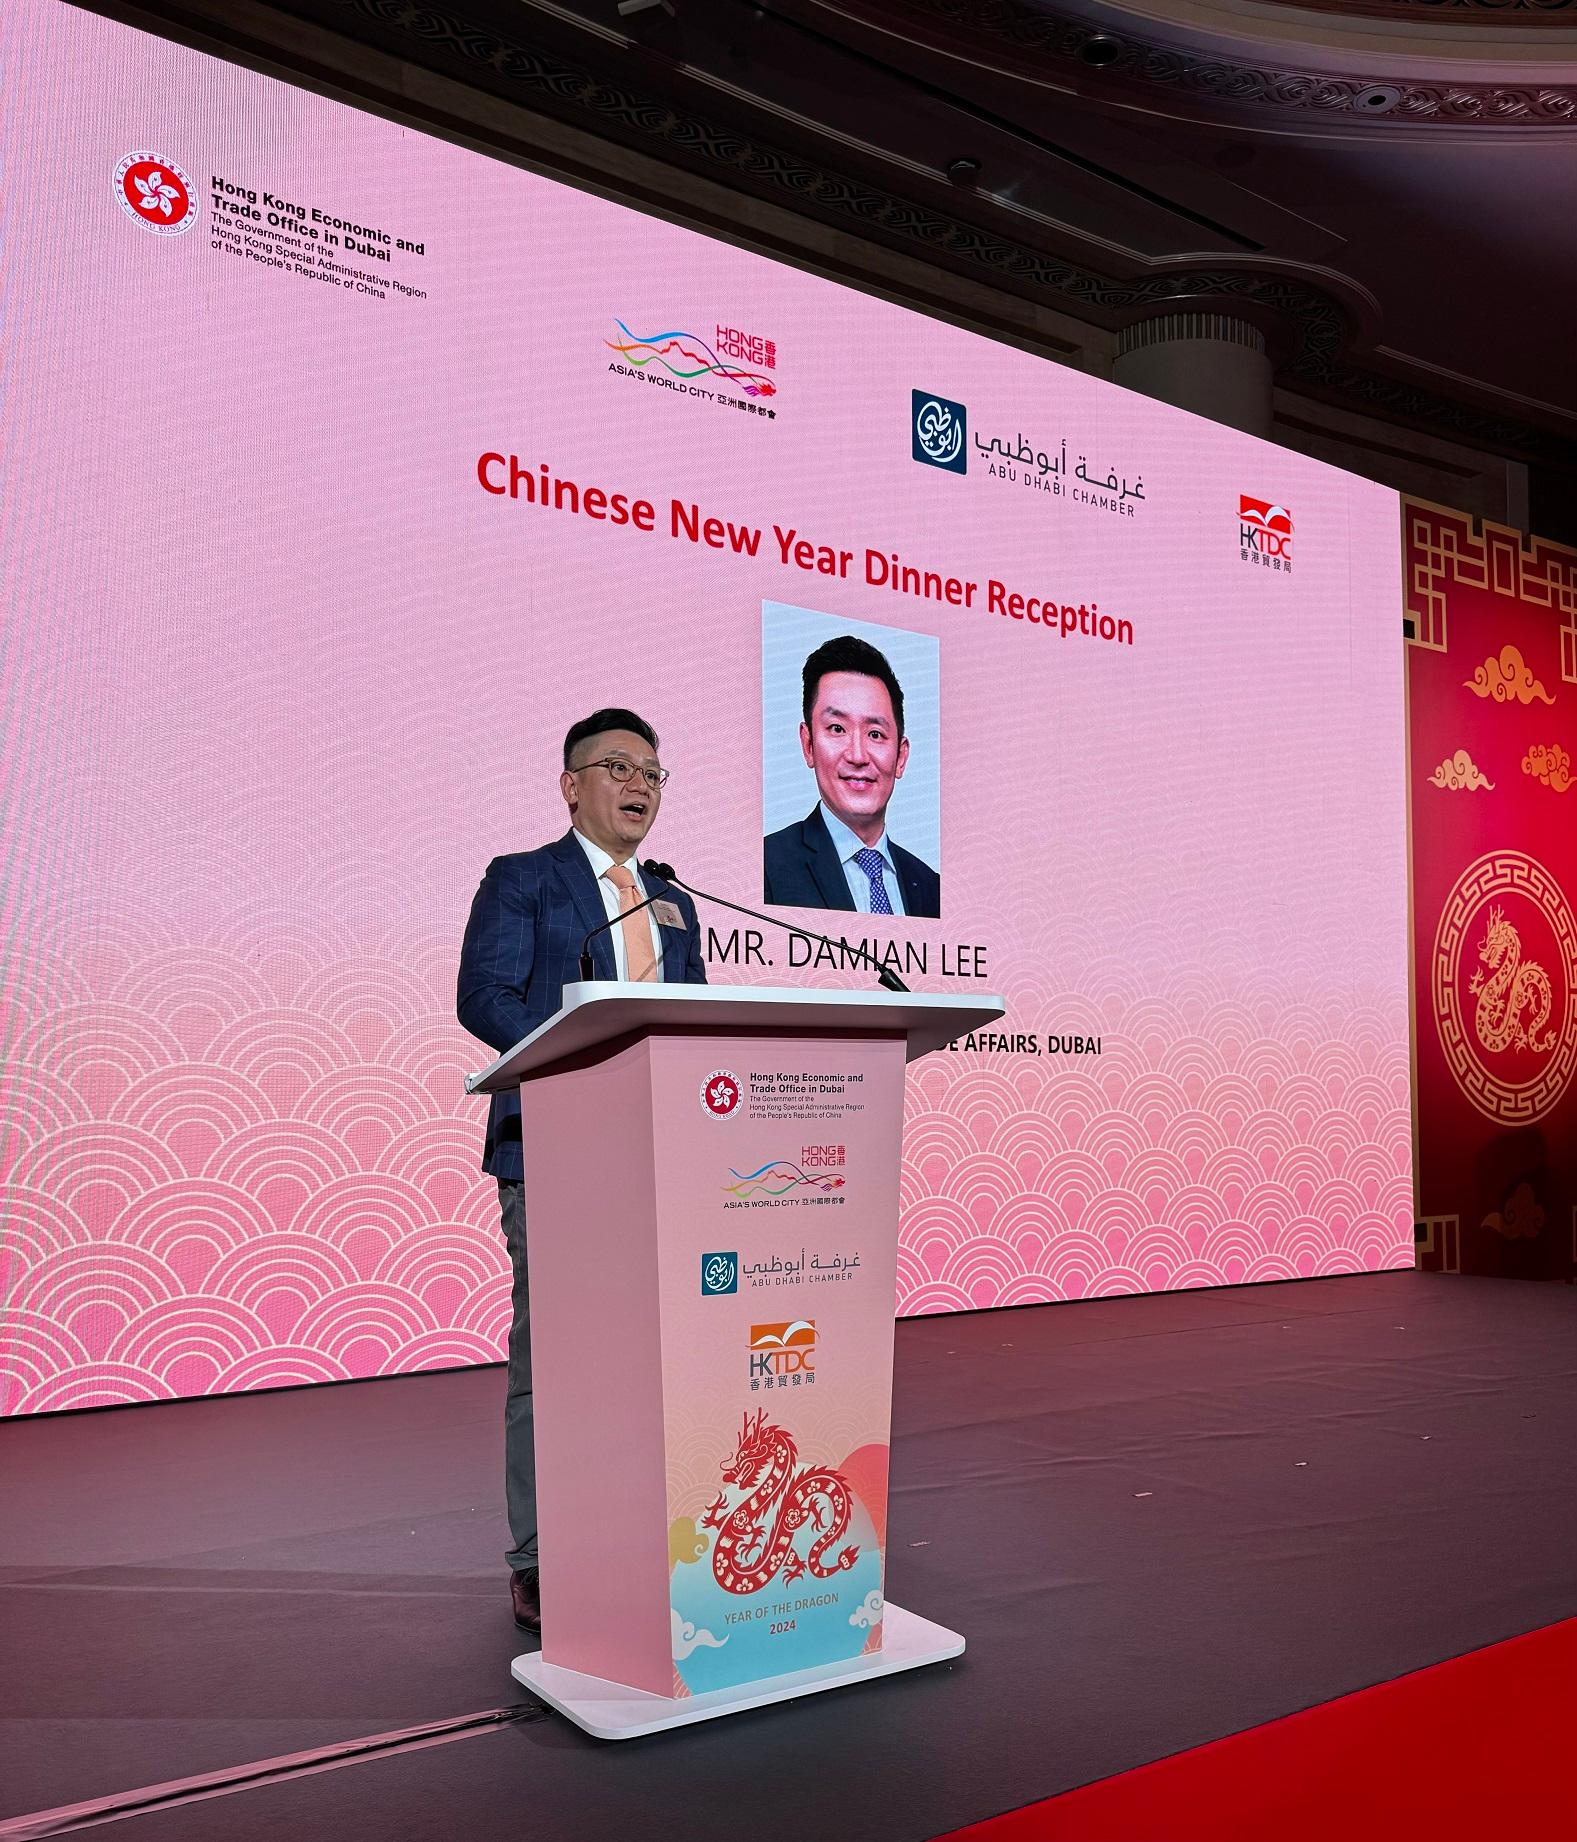 The Hong Kong Economic and Trade Office in Dubai (Dubai ETO), in collaboration with the Hong Kong Trade Development Council and the Abu Dhabi Chamber of Commerce and Industry, hosted a Chinese New Year dinner reception in Abu Dhabi, the United Arab Emirates, on February 28 (Abu Dhabi time). Photo shows the Director-General of the Dubai ETO, Mr Damian Lee, delivering introductory remarks at the dinner reception.